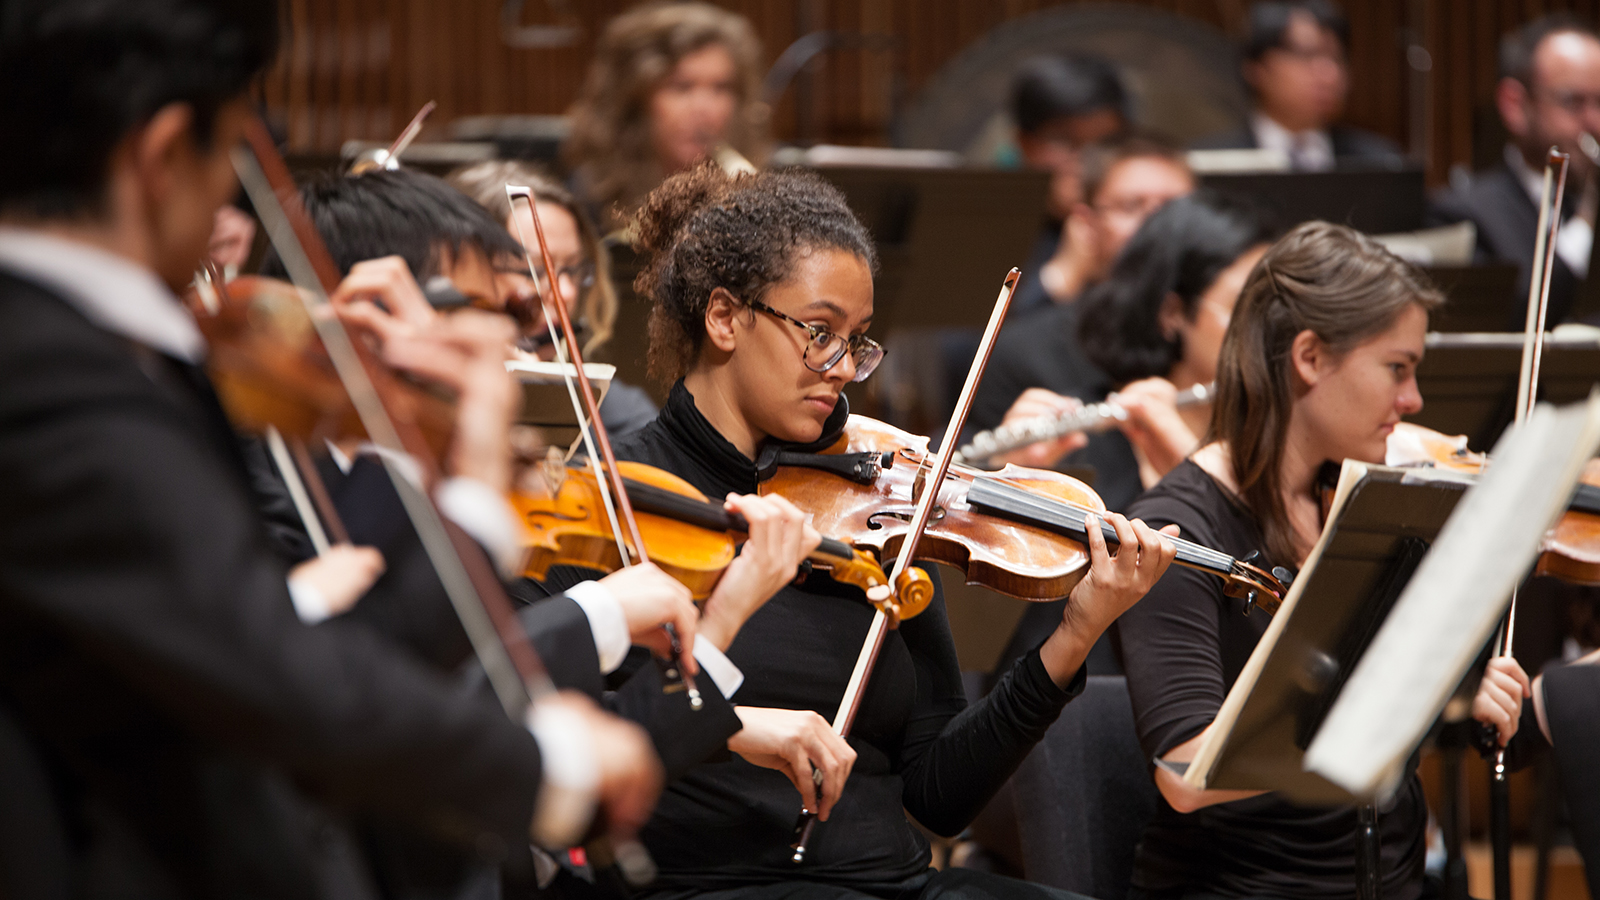 A close-up shot of violinists performing in an orchestra.